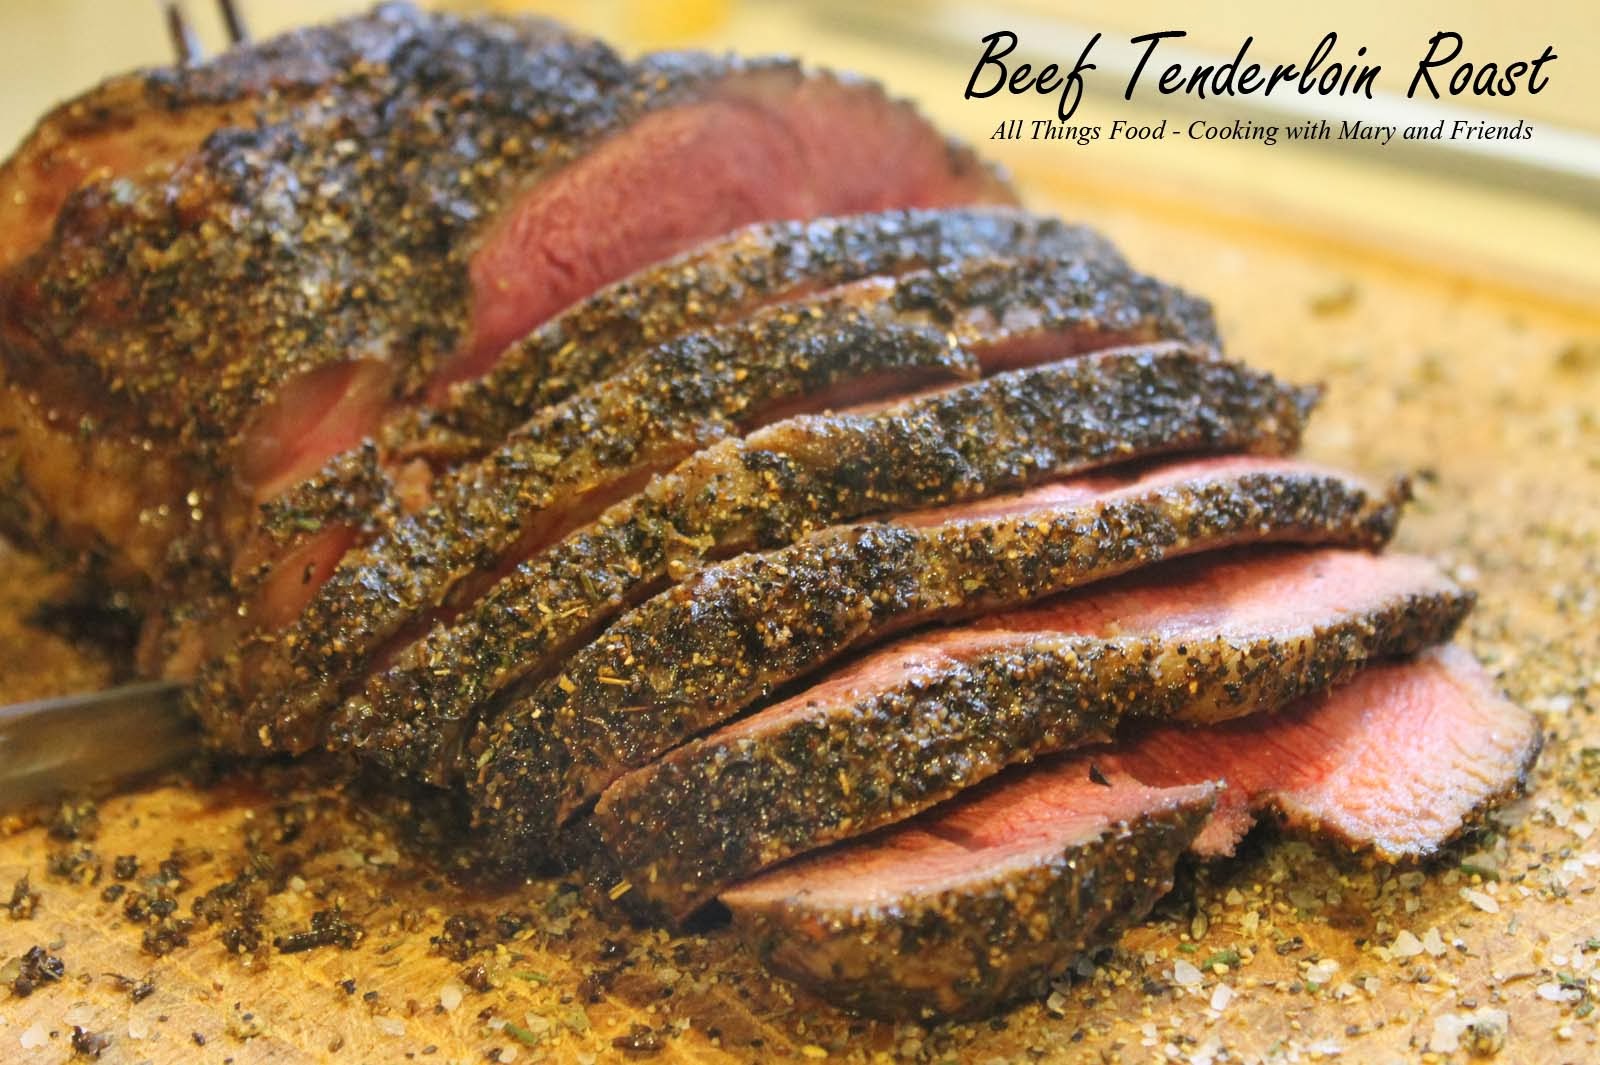 Cooking With Mary and Friends: Roasted Beef Tenderloin